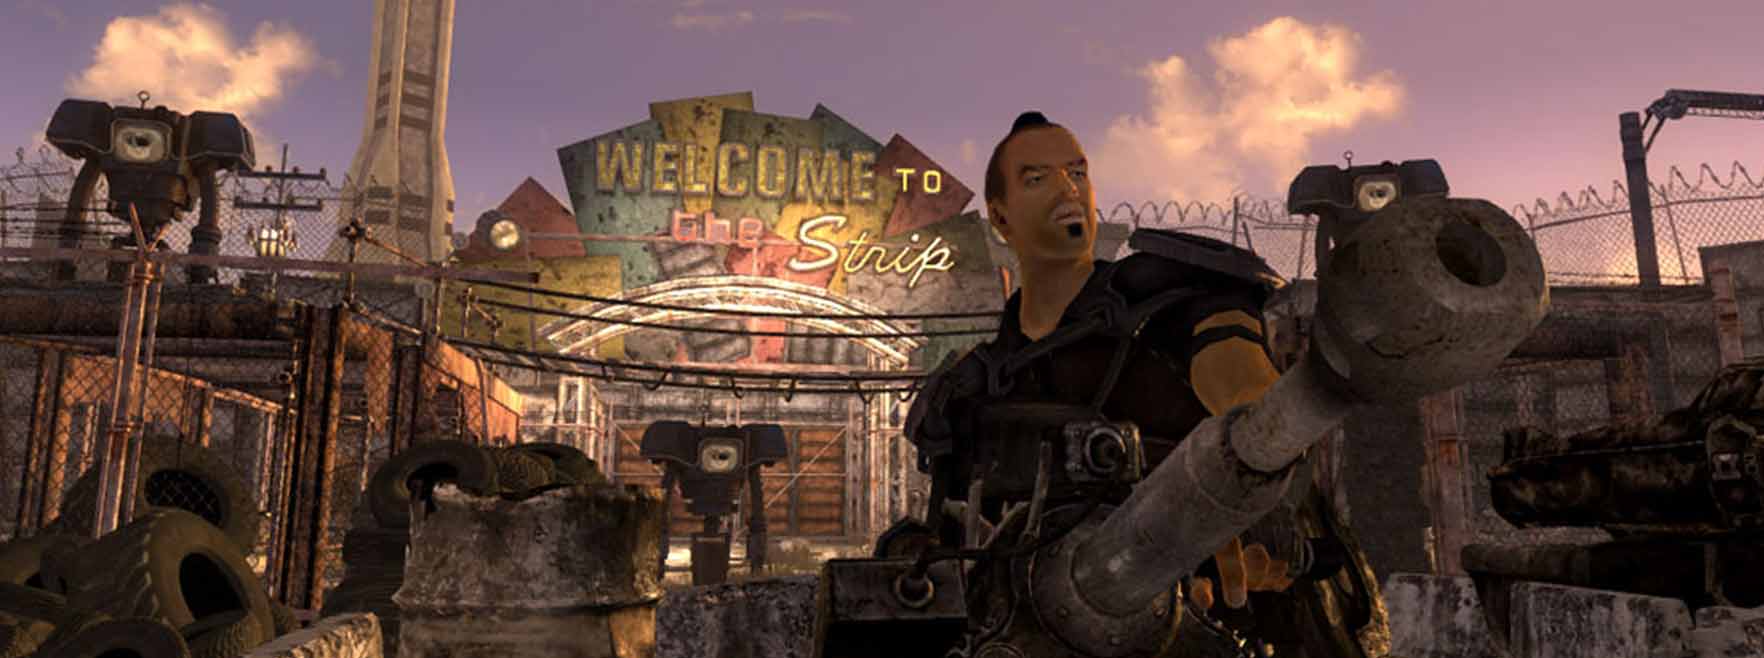 play fallout new vegas on ps4